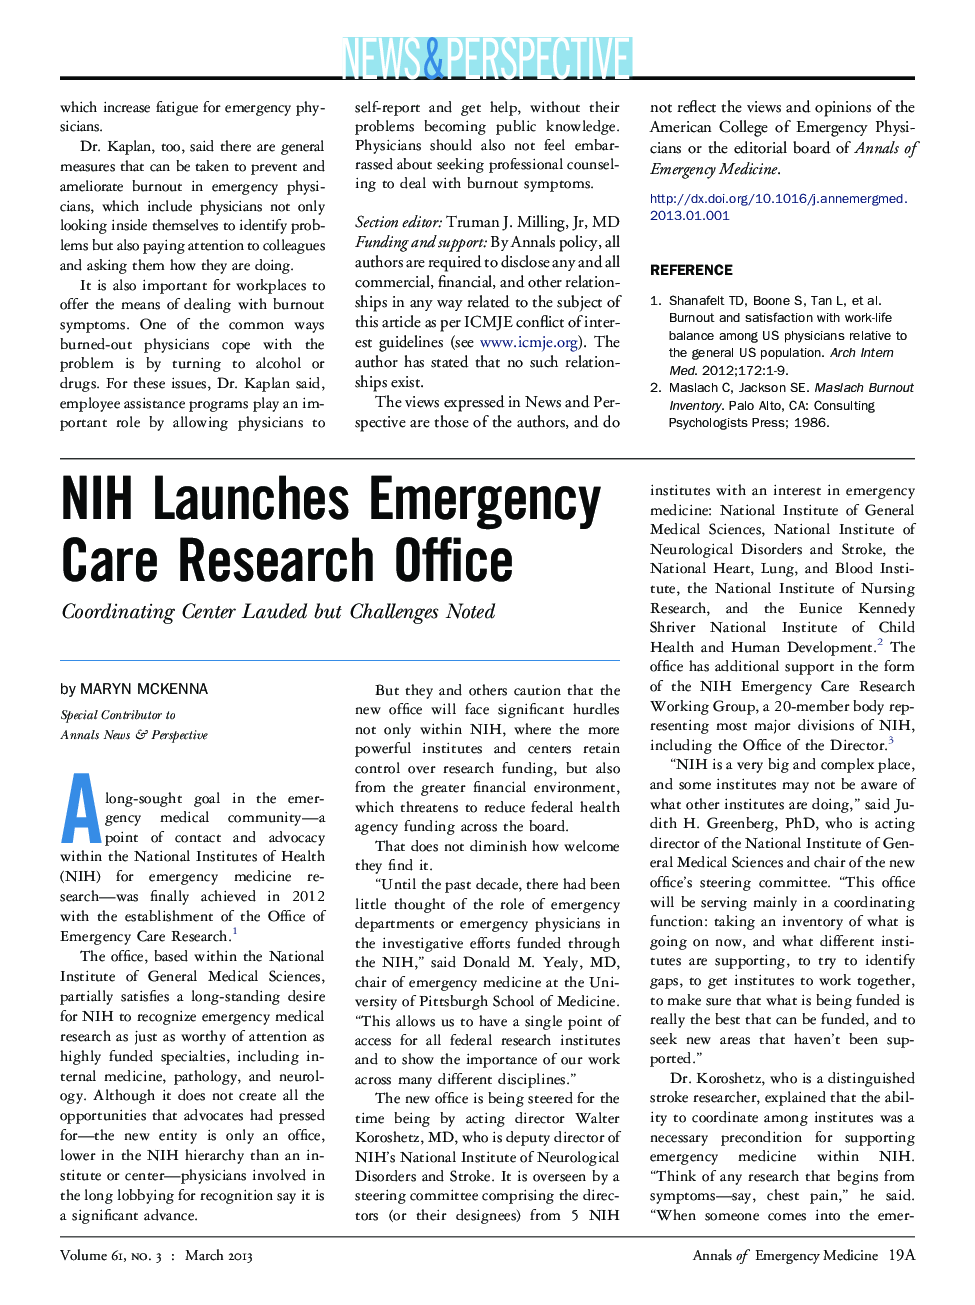 NIH Launches Emergency Care Research Office